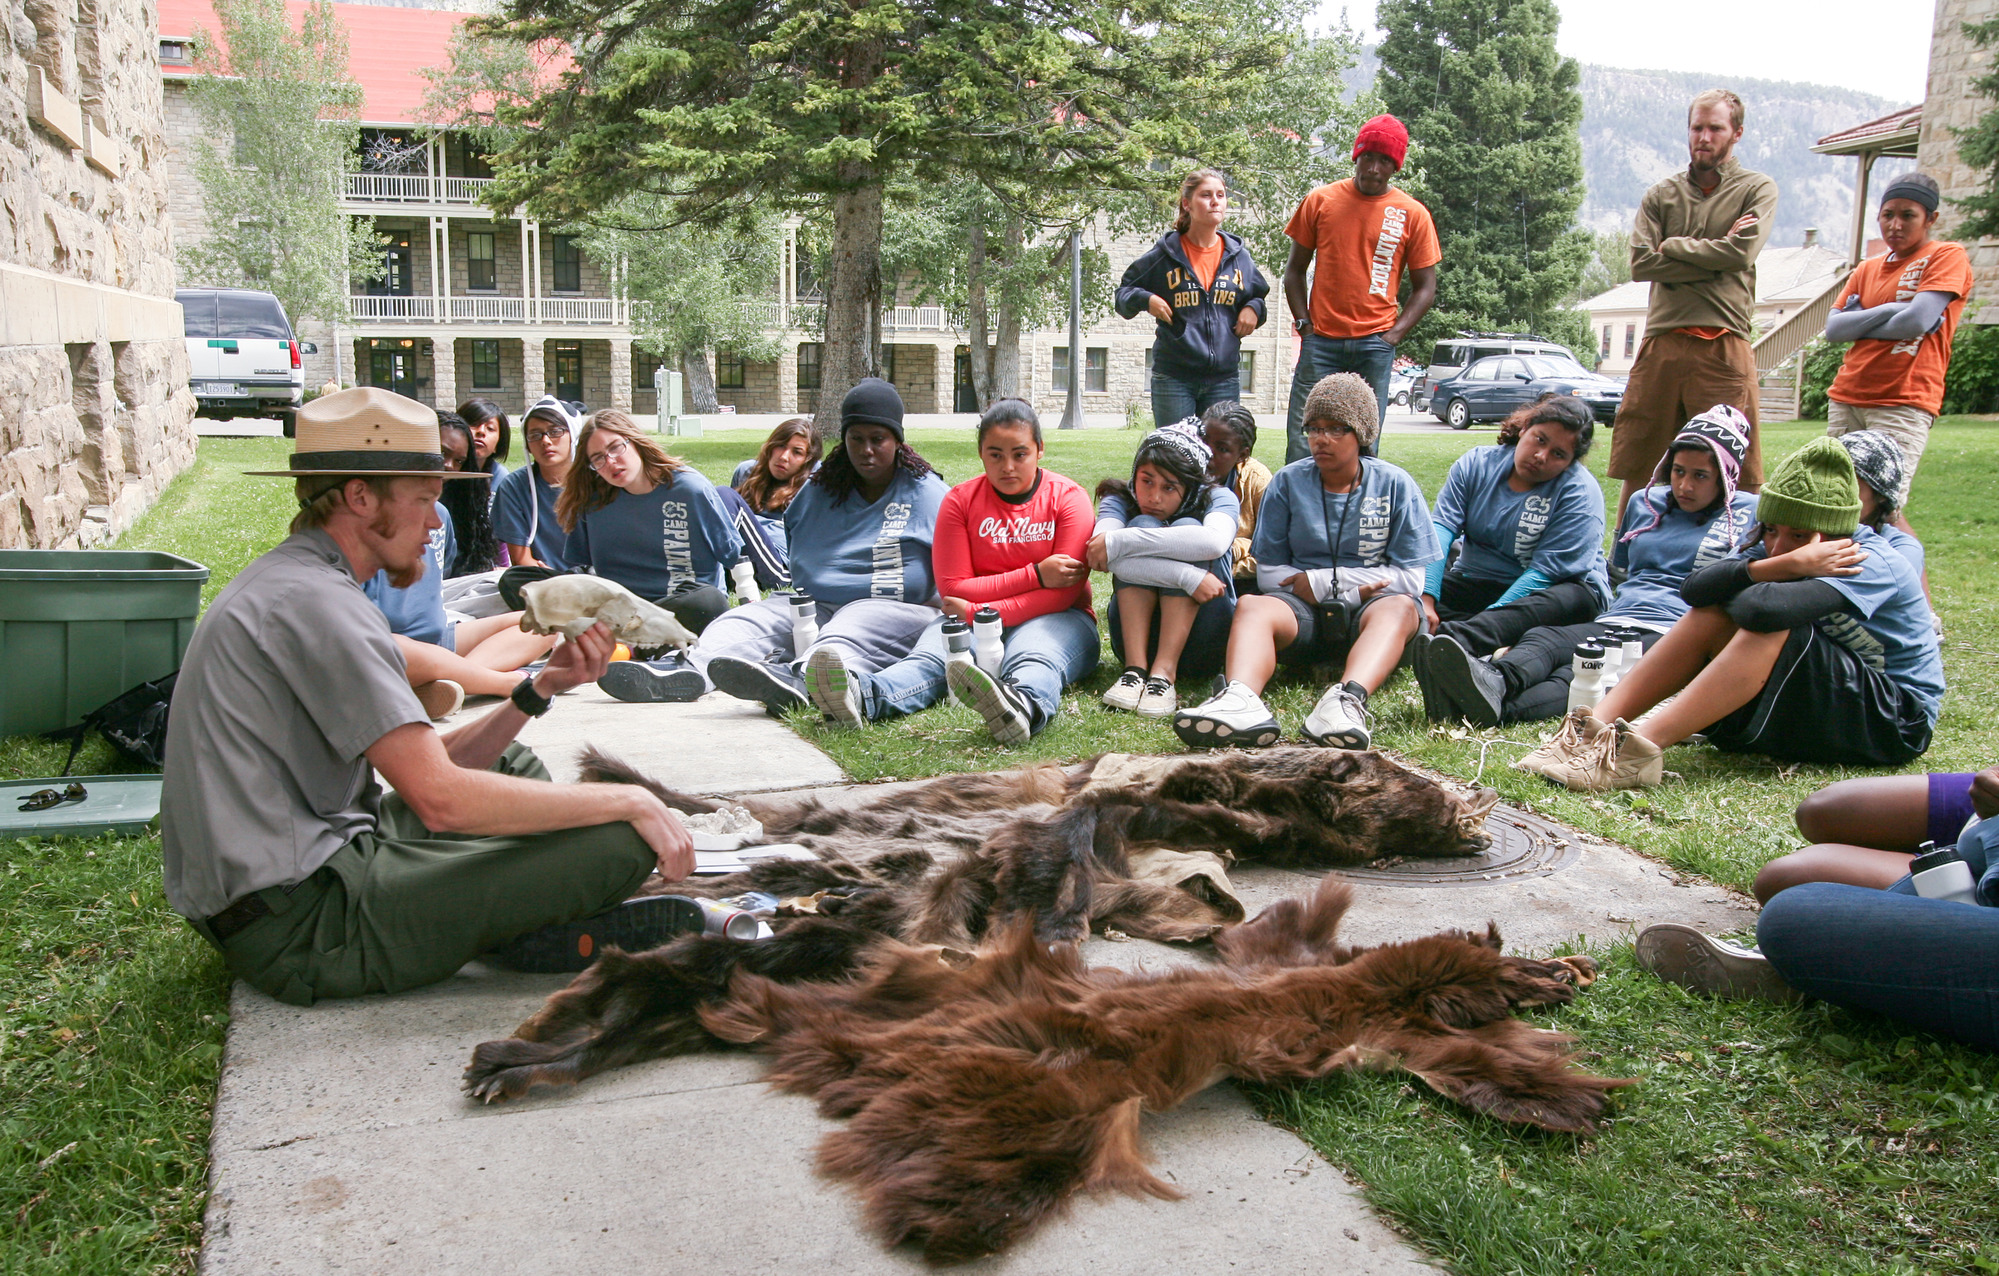 Male ranger sits on a sidewalk with animal pelts and talks with a large group of teenager, many of which are also seated on the ground.